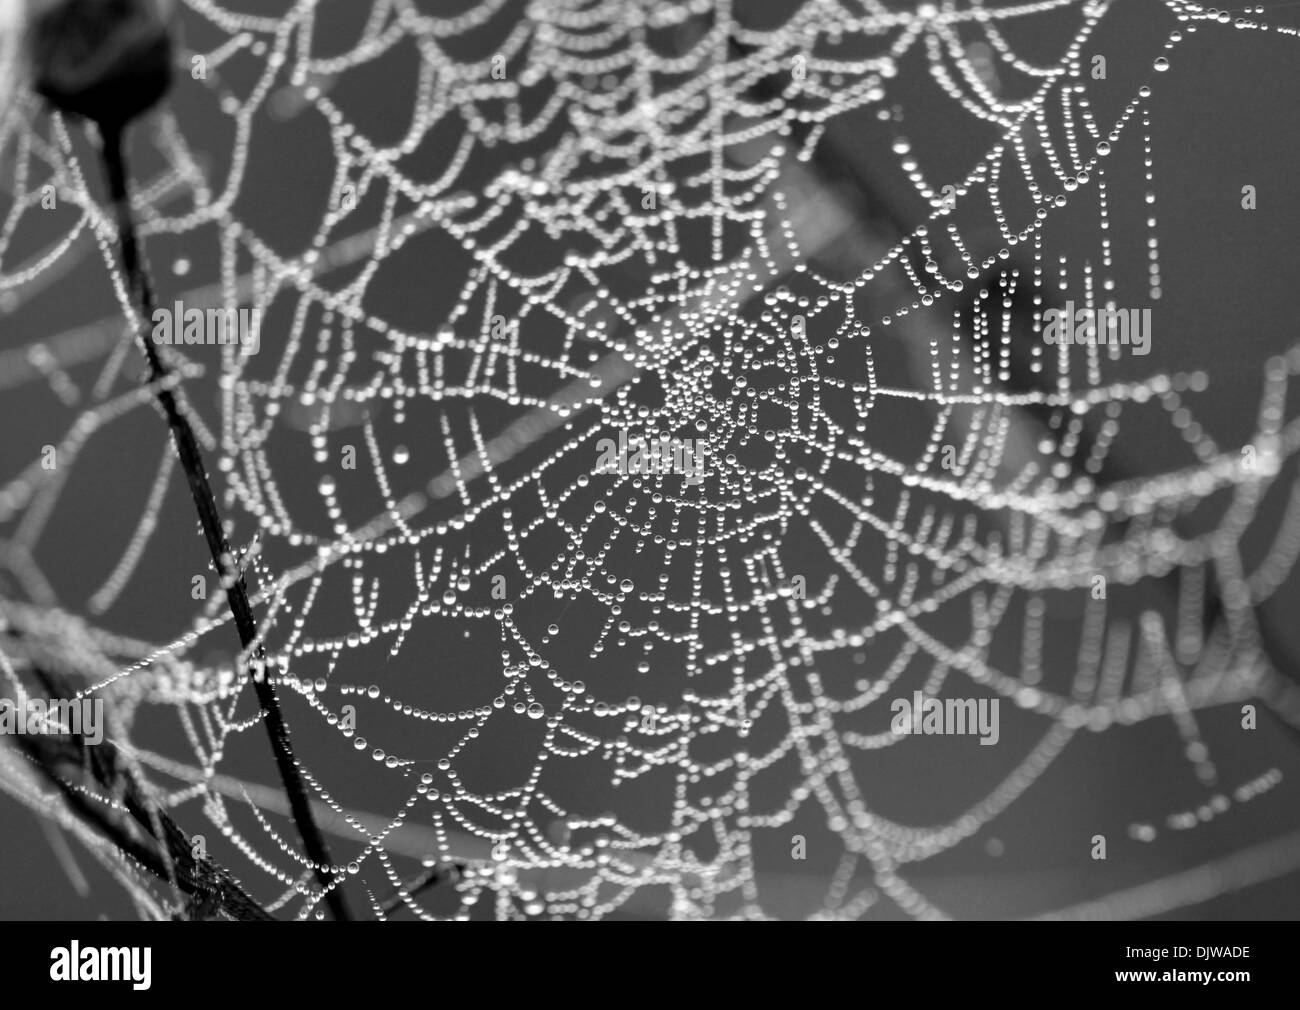 Spider web with water drops Stock Photo